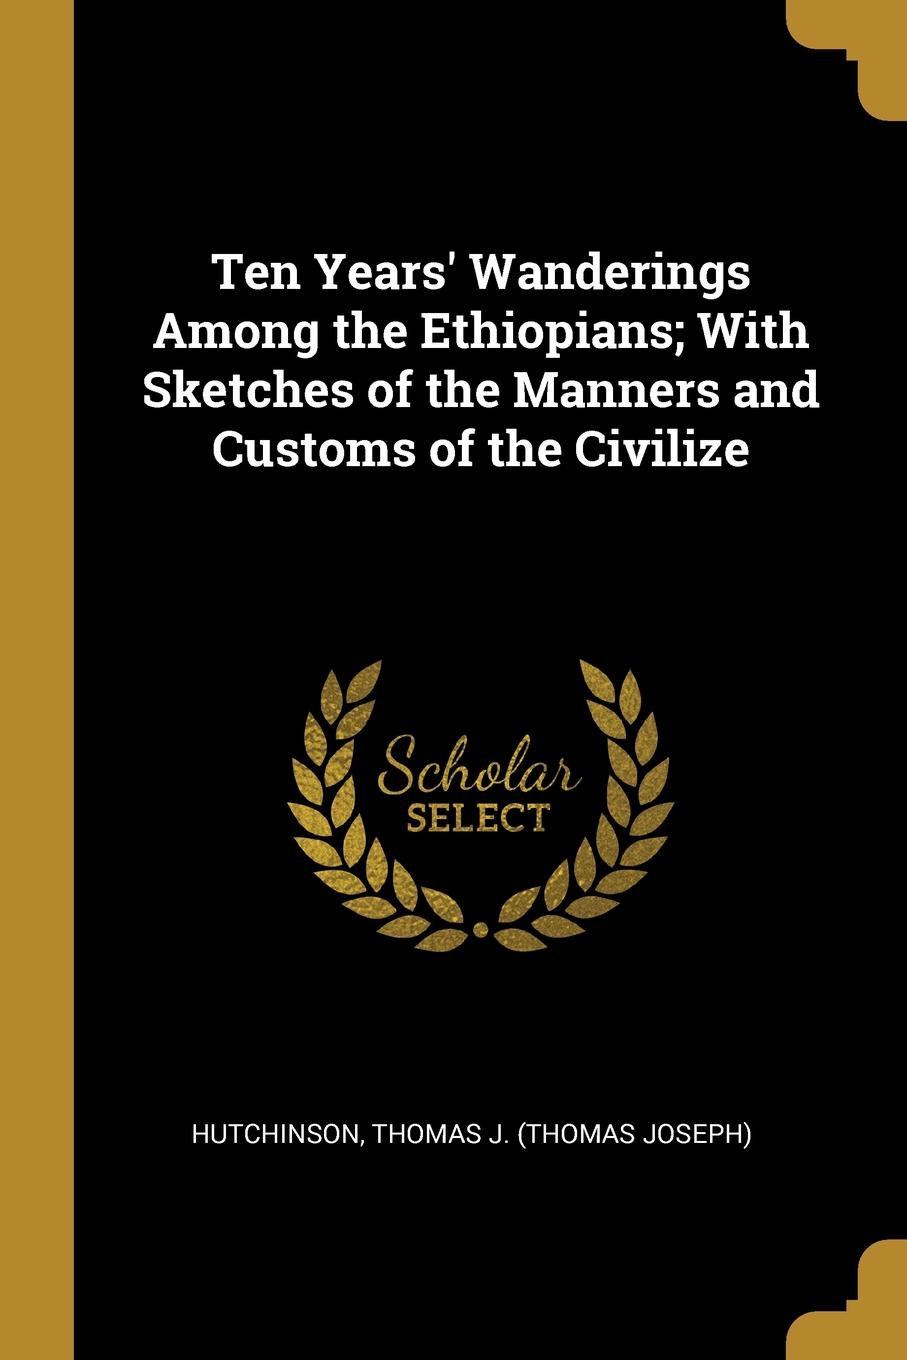 Ten Years. Wanderings Among the Ethiopians; With Sketches of the Manners and Customs of the Civilize